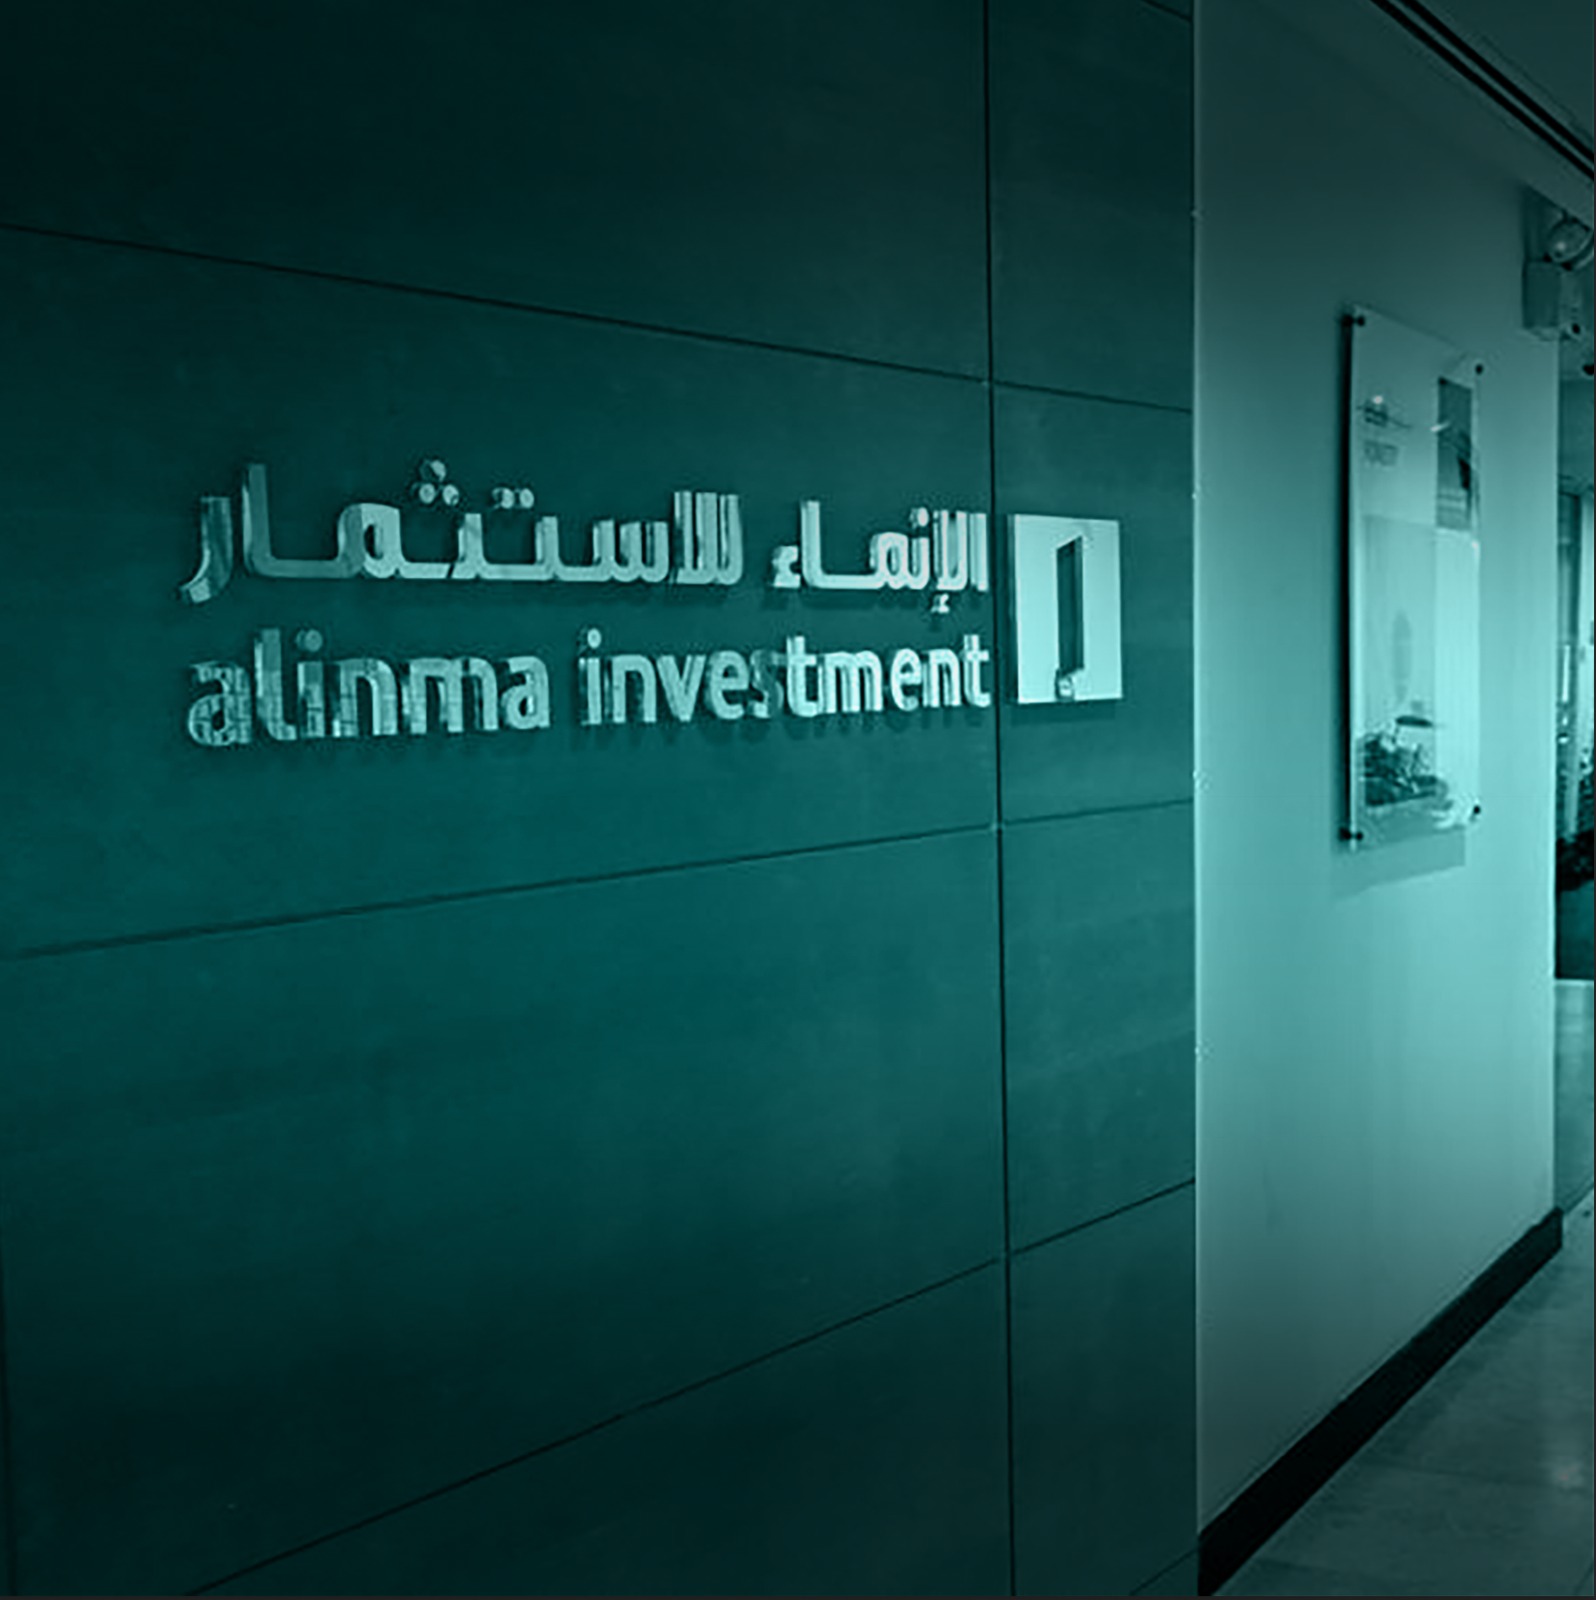 Alinma investment contact